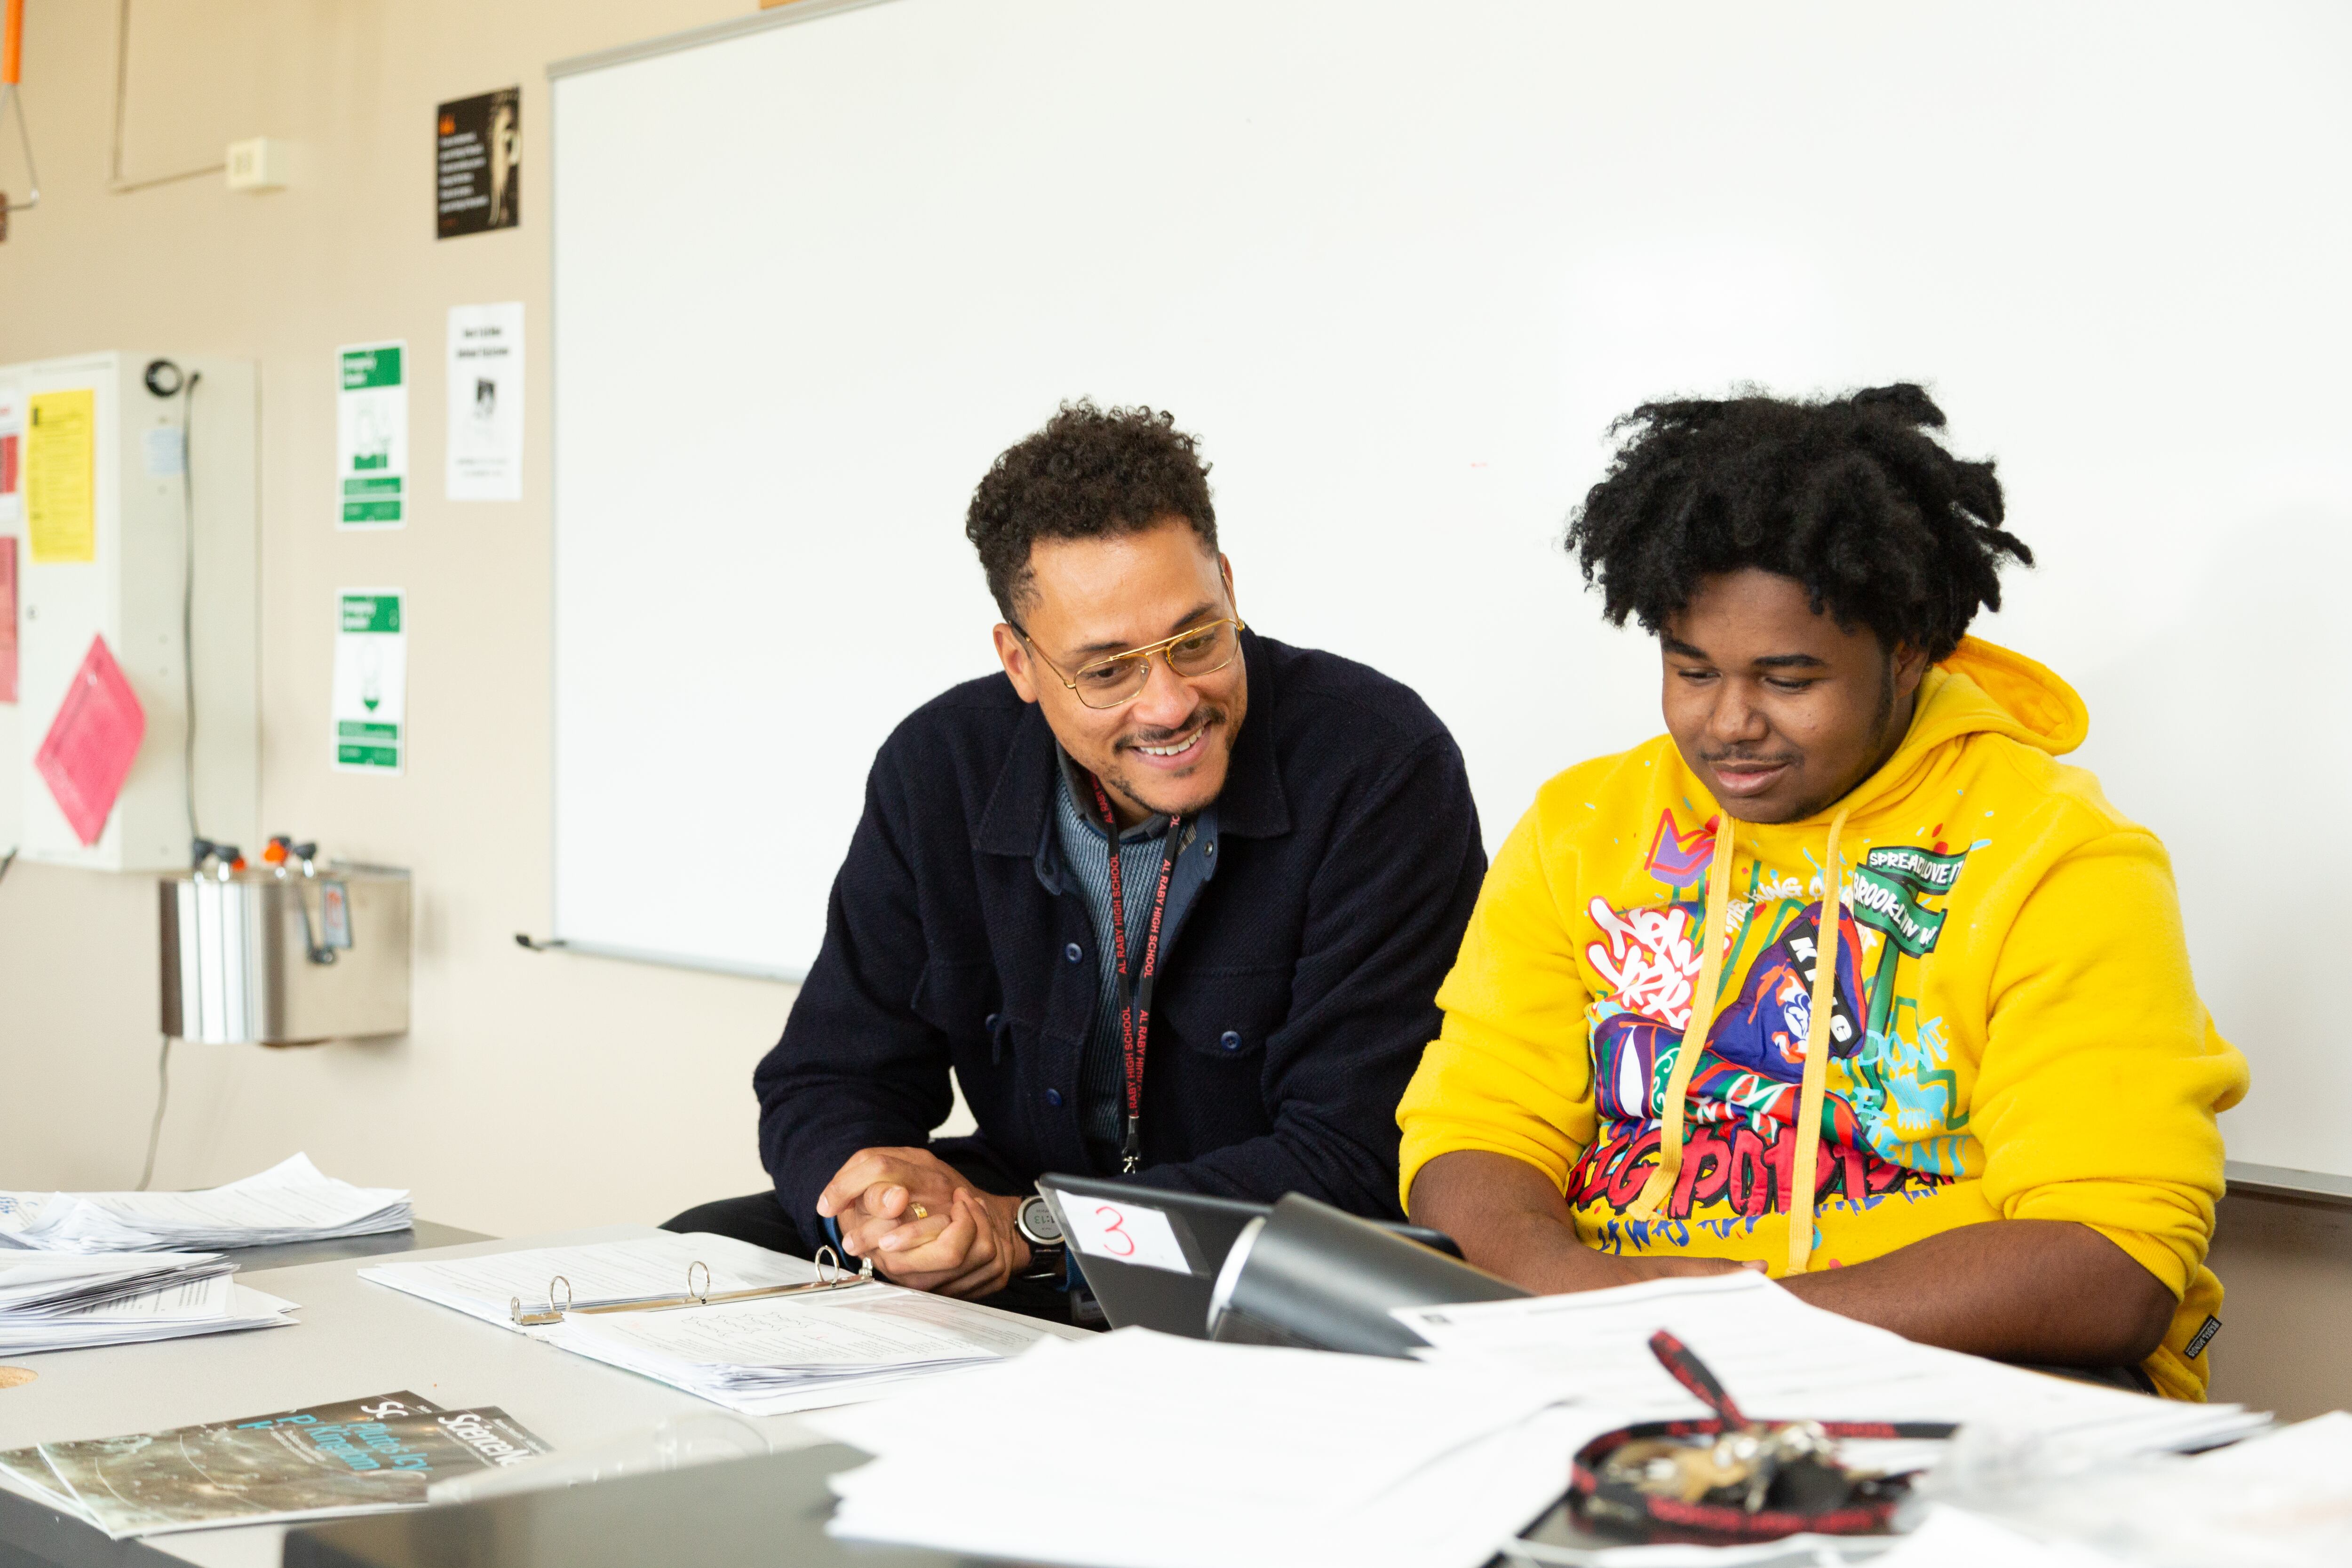 Nathaniel Joseph (on the left) sits with a student to work on an assignment. They are both sitting at a desk in a classroom.